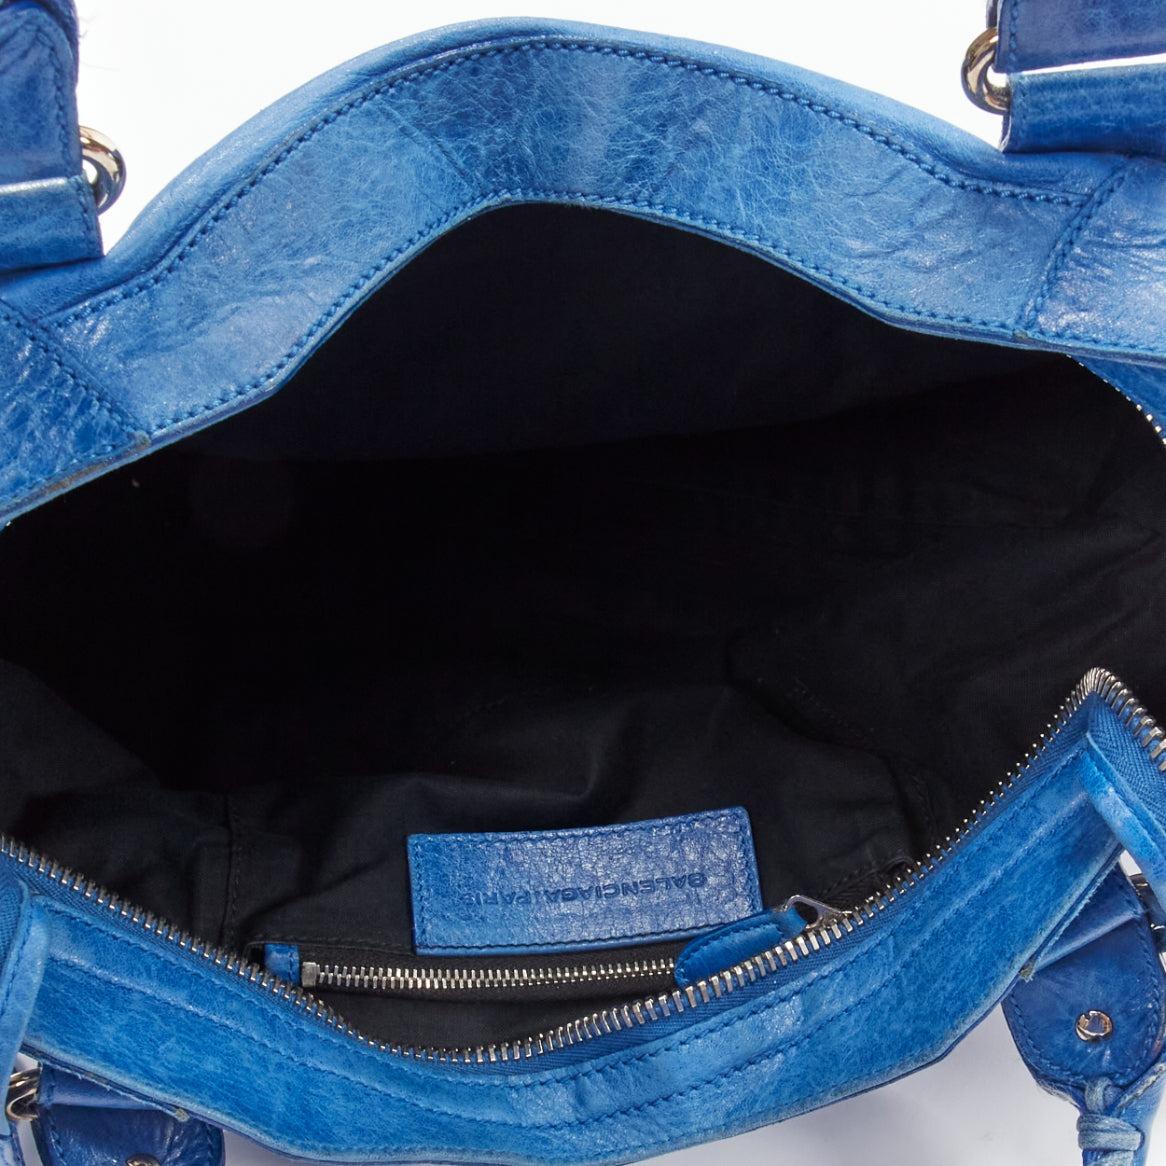 BALENCIAGA Giant 21 City blue leather SHW motorcycle tote bag 7